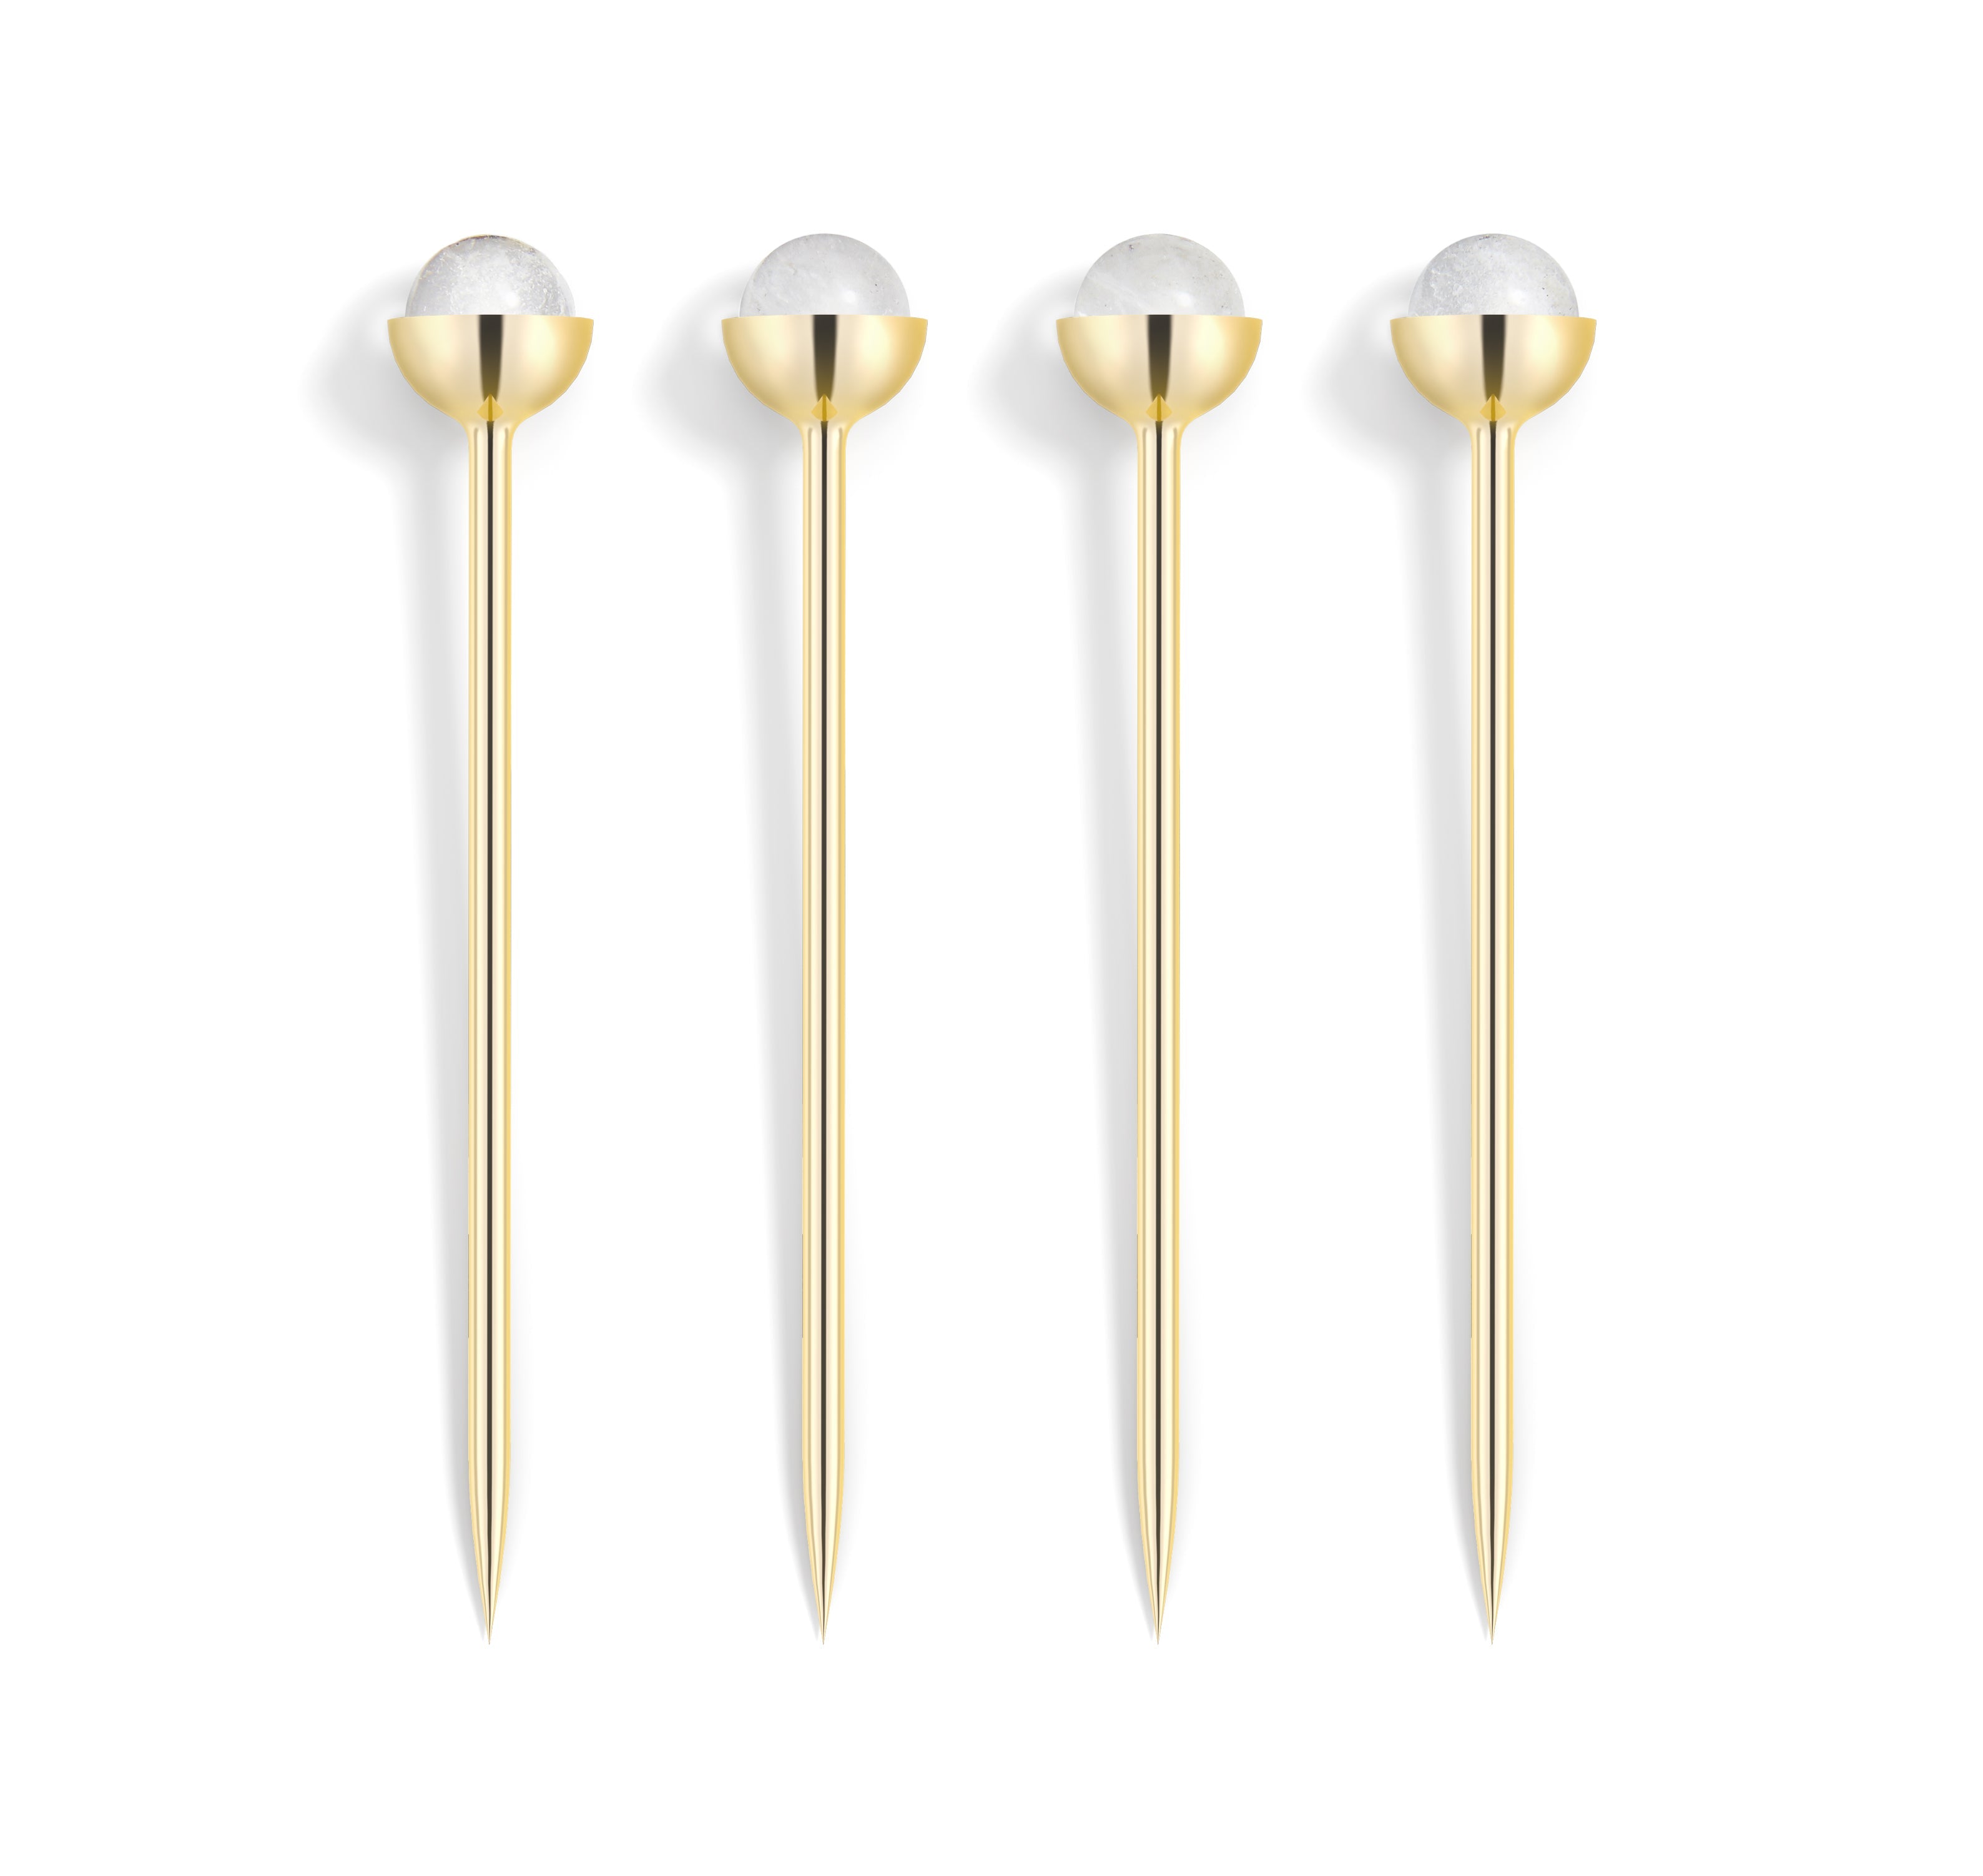 Hospitality Cocktail Picks, Gold & Crystal, Set of 4 by ANNA New York